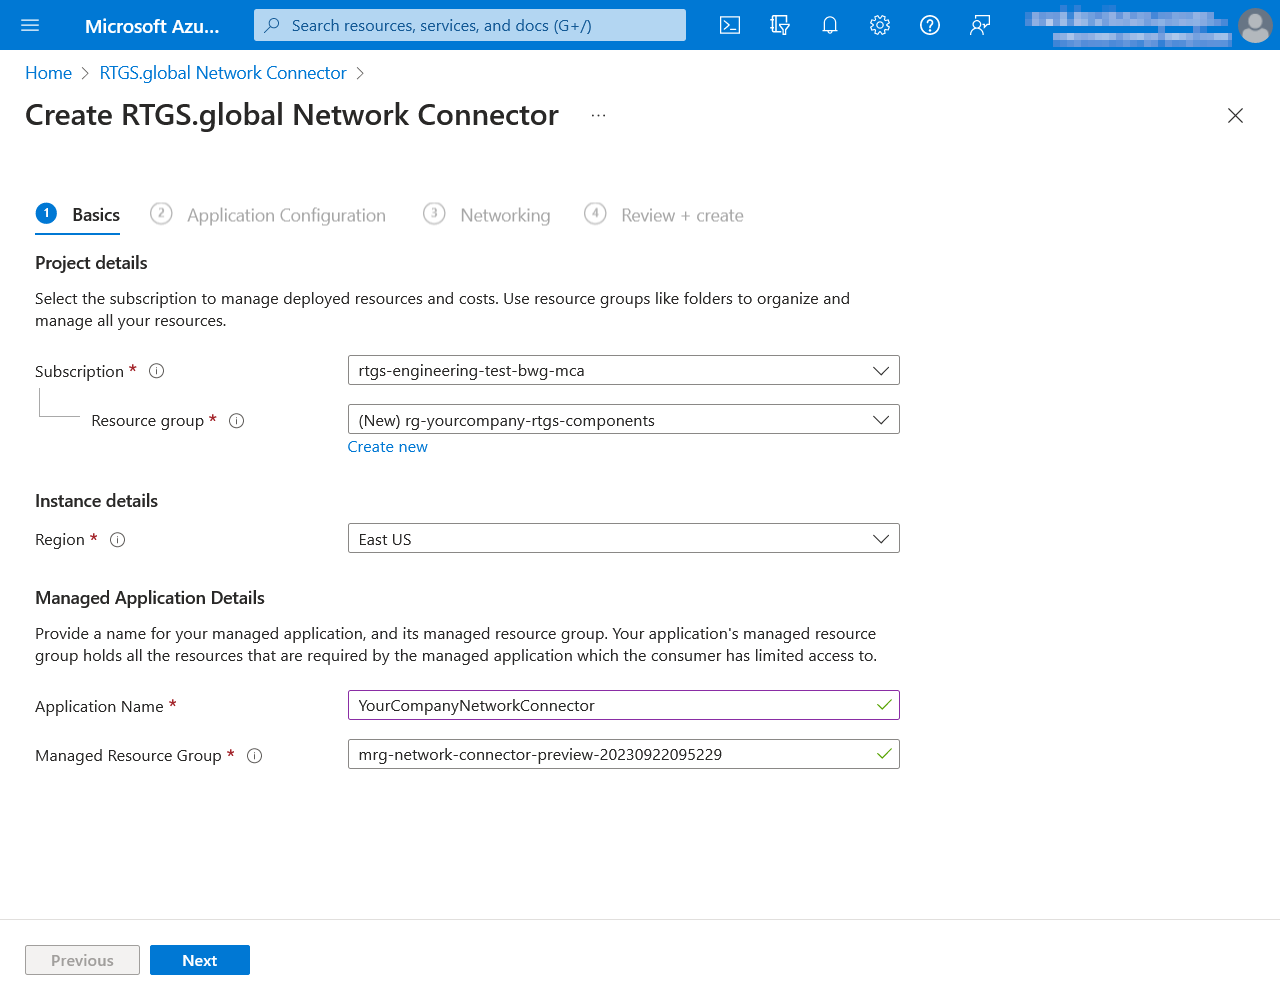 Image showing the second step of the RTGS.global Network Connector deployment wizard